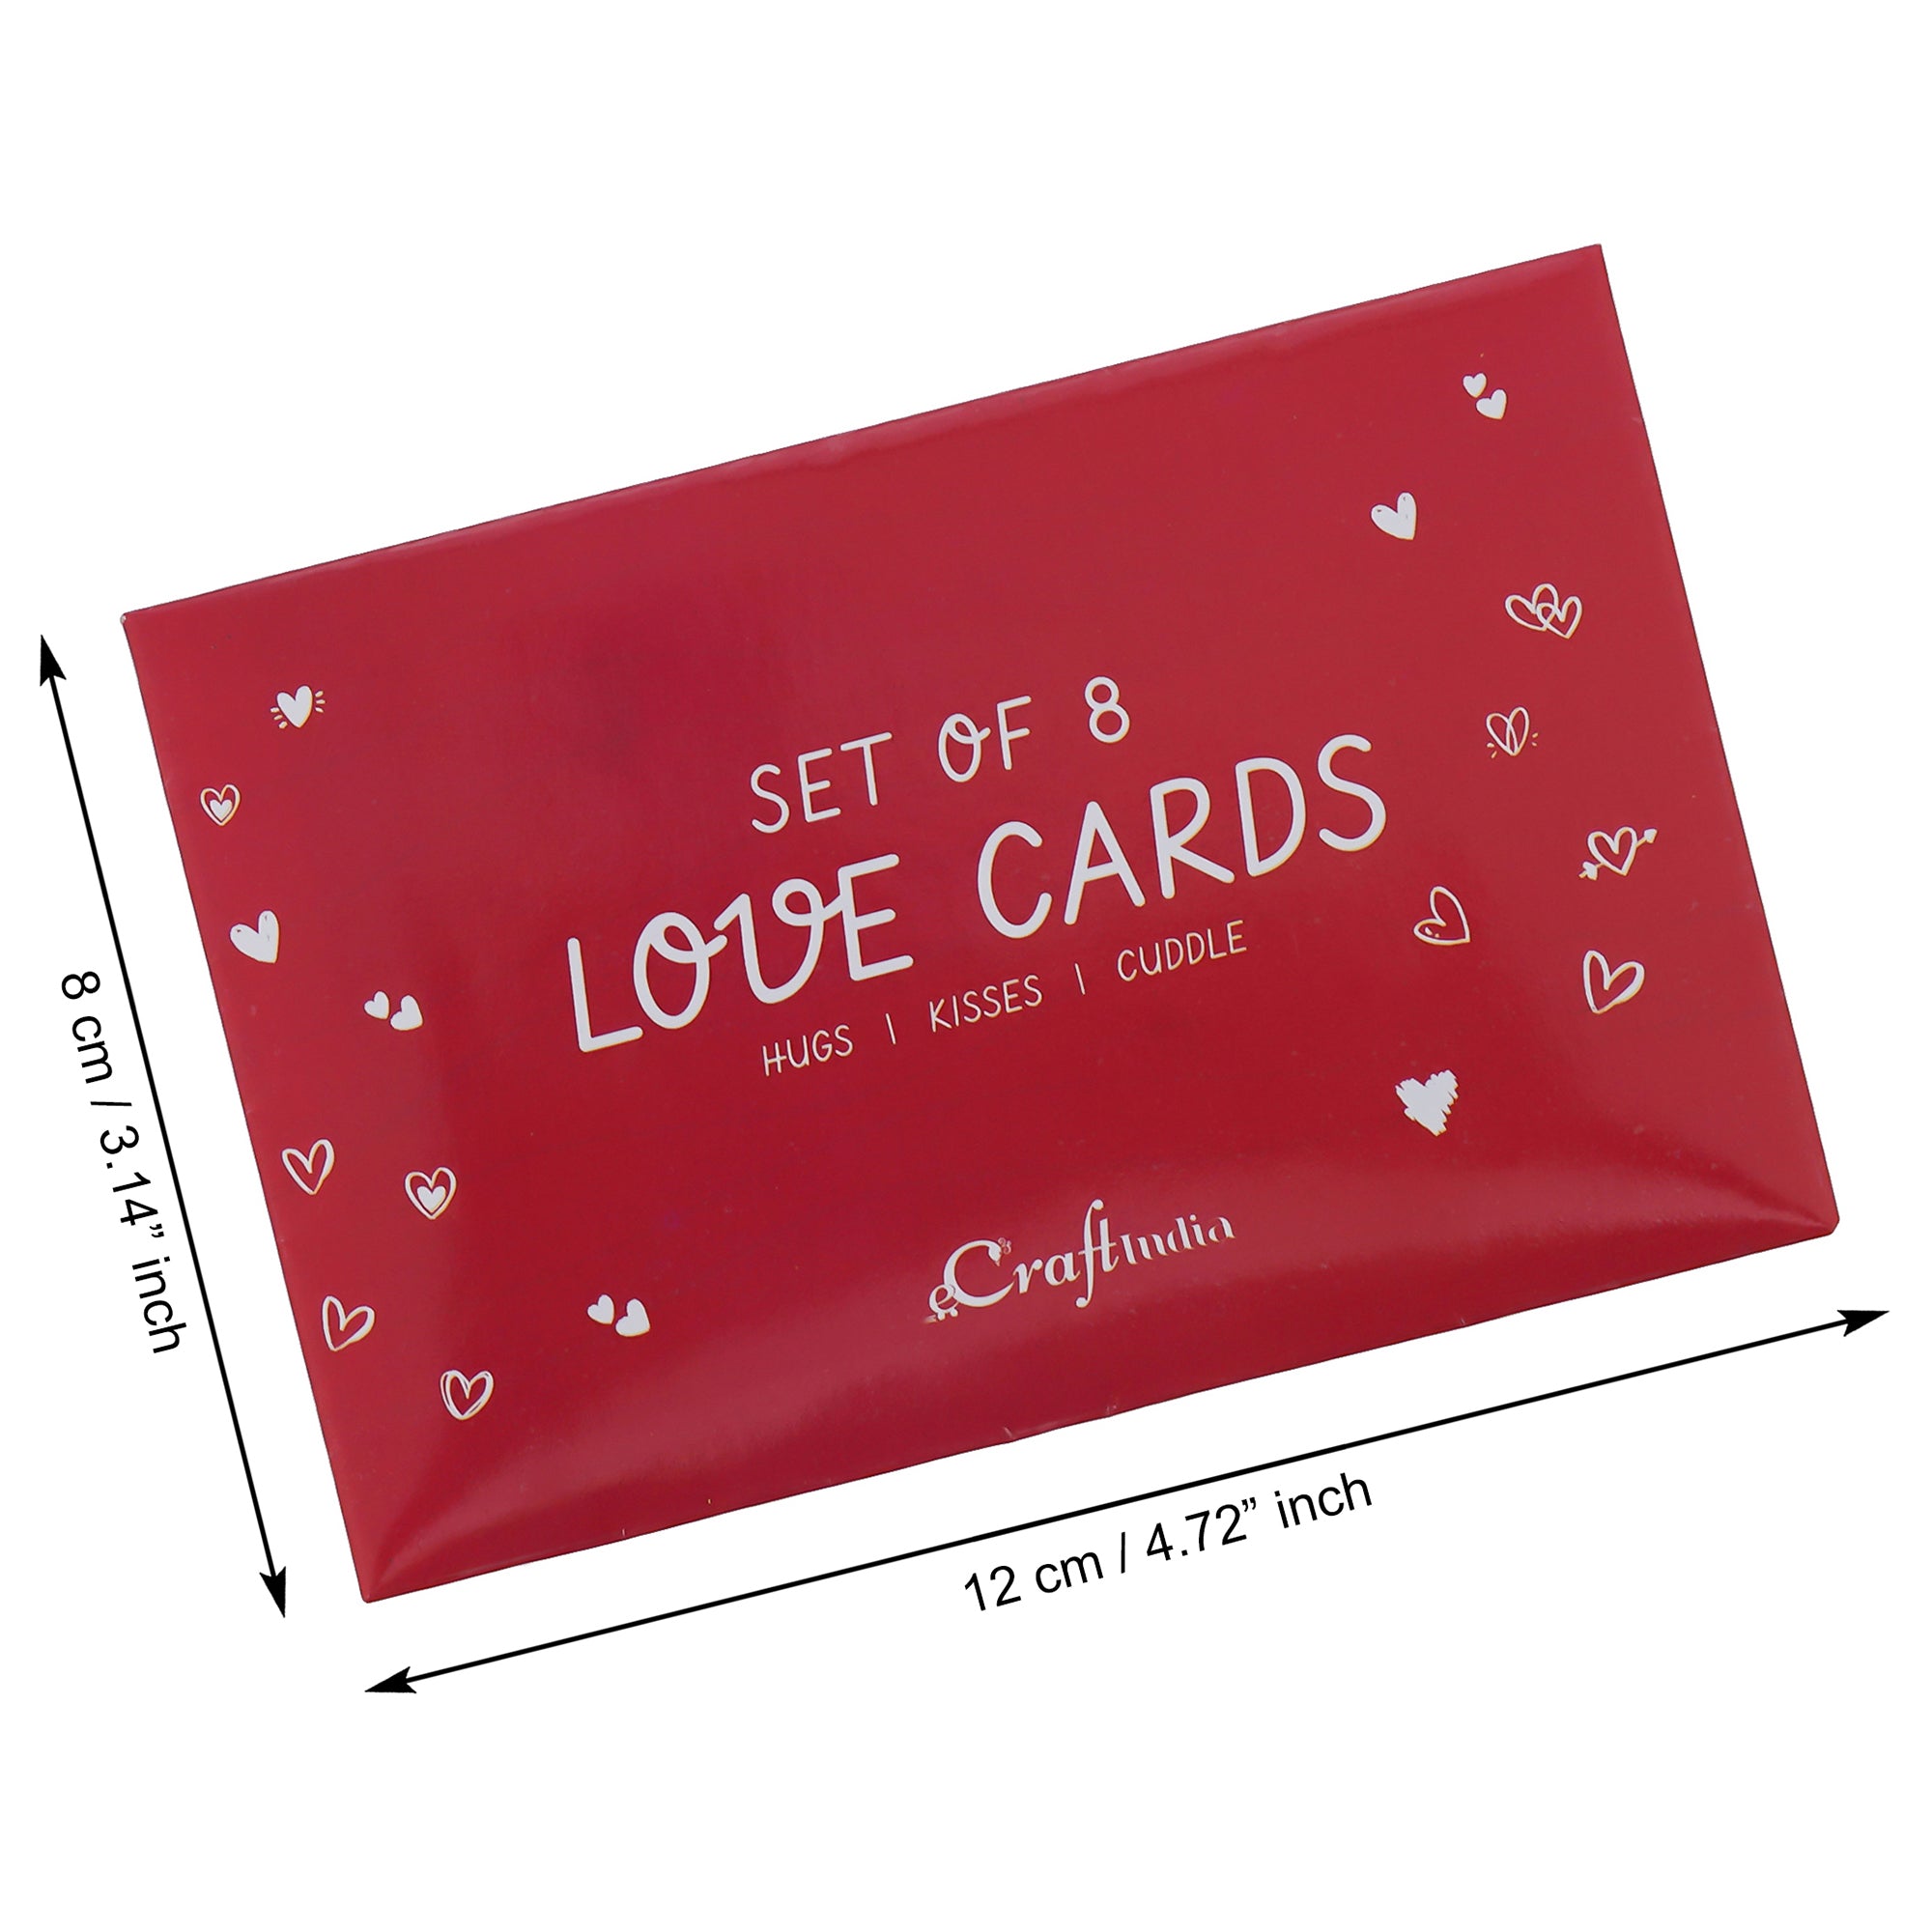 Valentine Combo of Pack of 8 Love Gift Cards, "20 Reasons Why I Love You" Printed on Little Red Hearts Decorative Wooden Gift Set Box 2